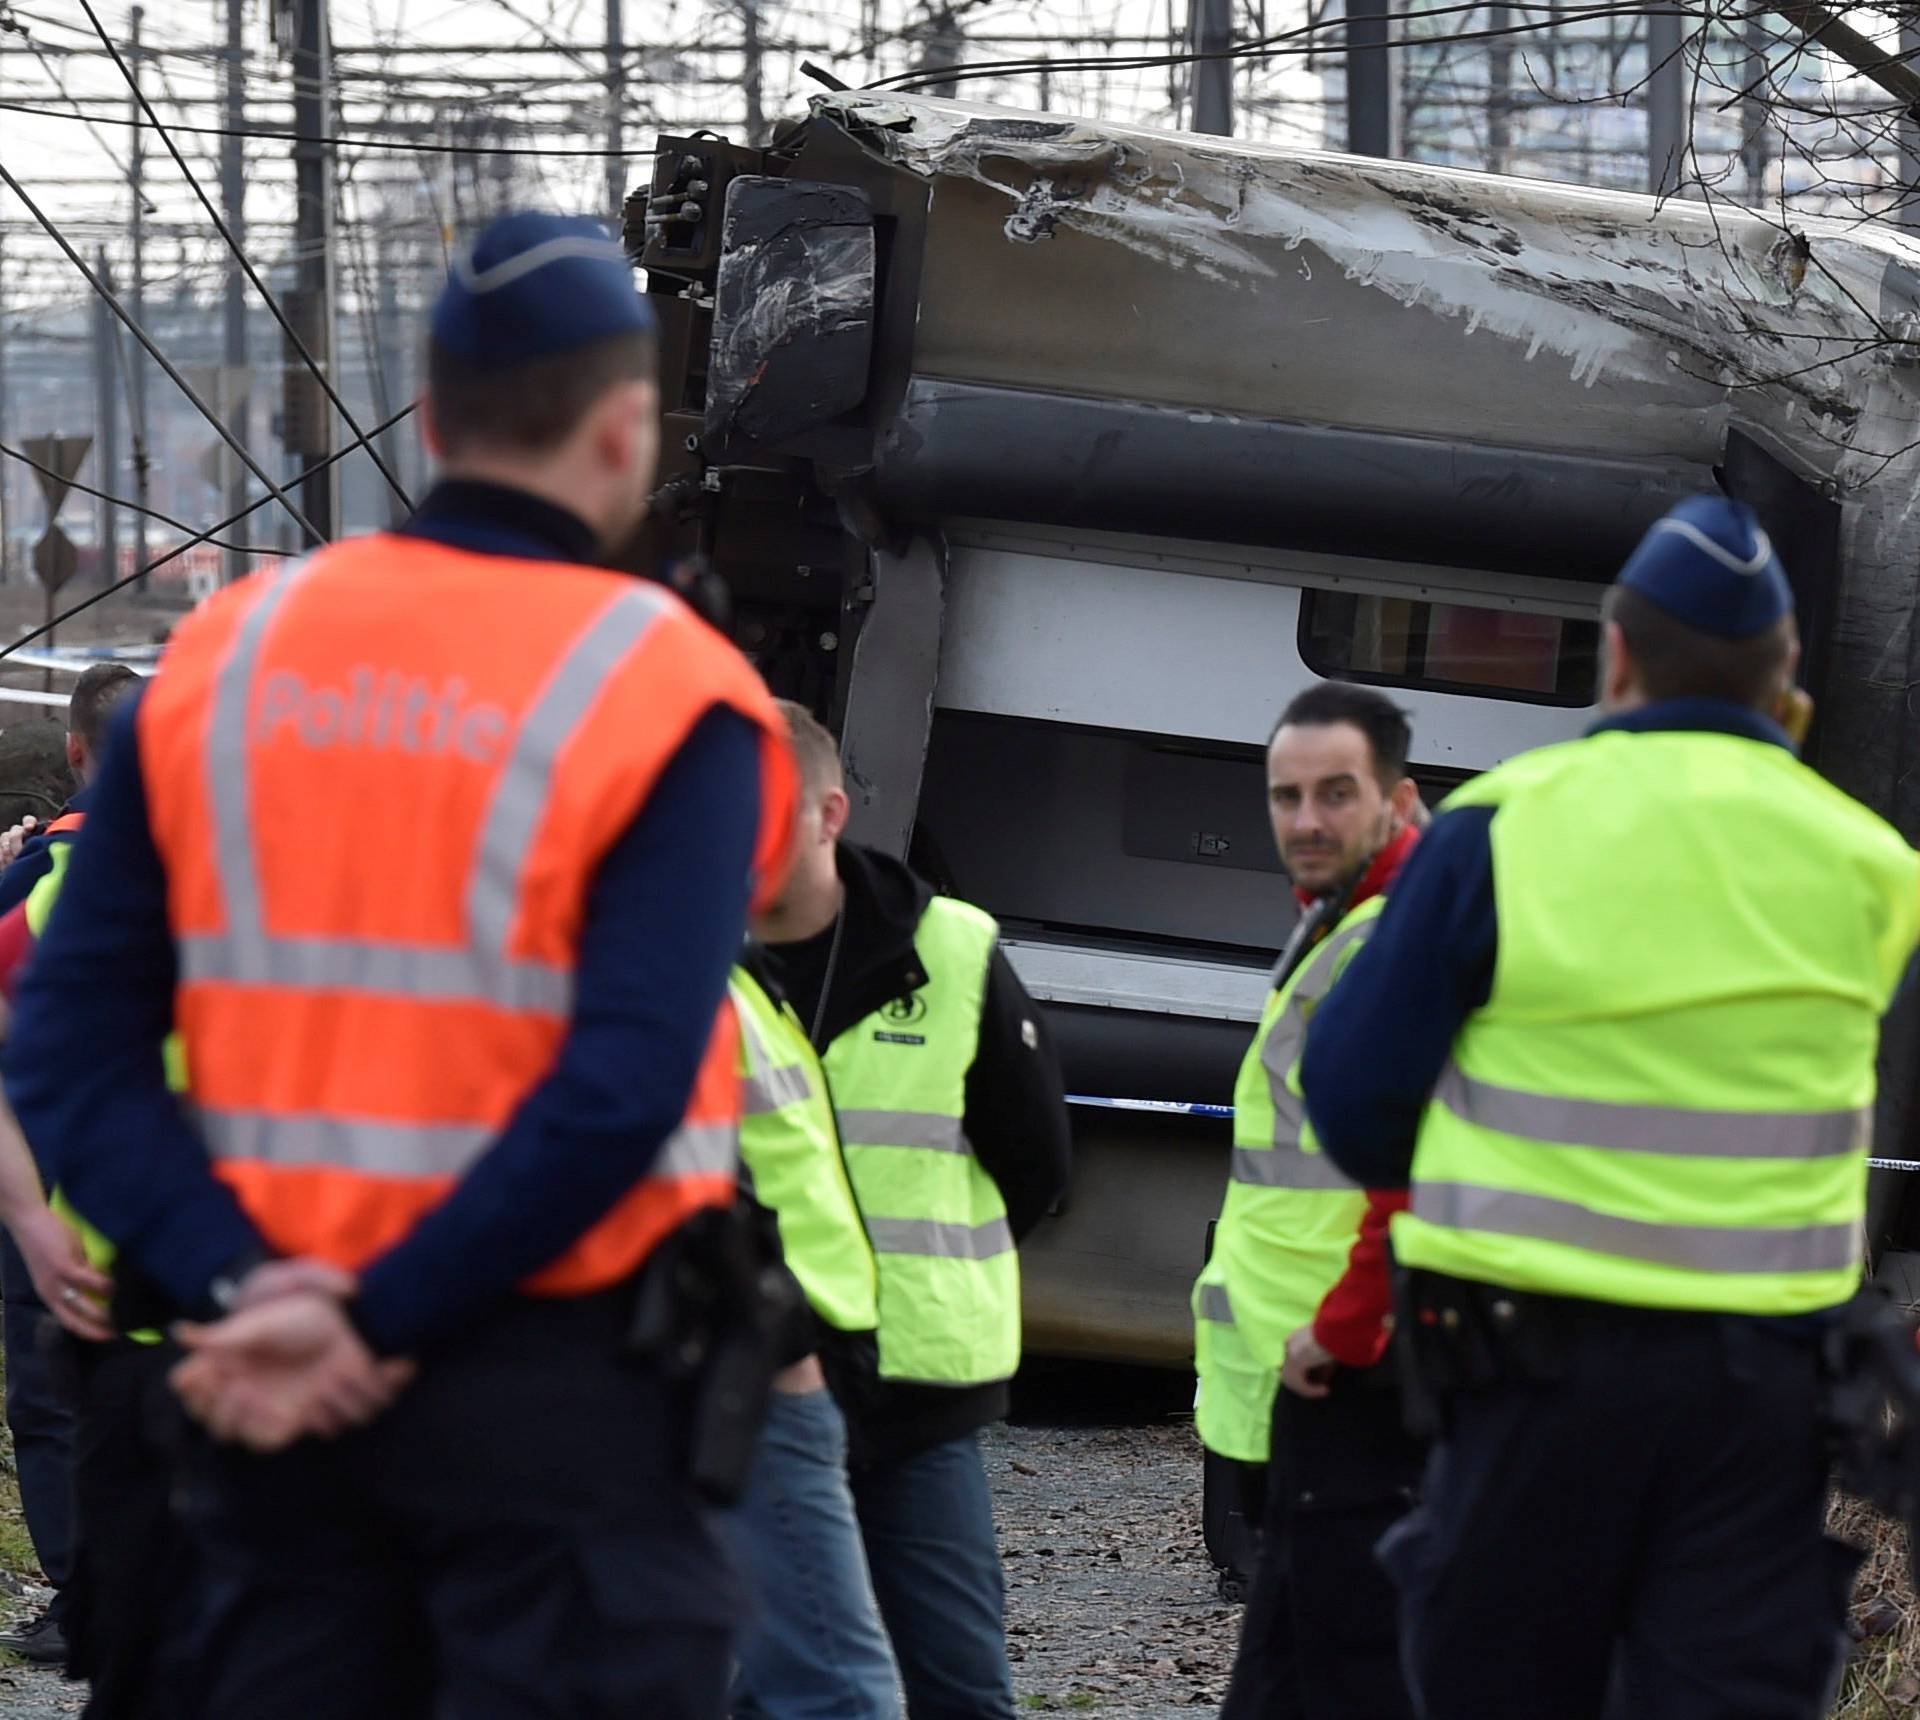 Rescuers and police officers stand next to the wreckage of a passenger train after it derailed in Kessel-Lo near Leuven